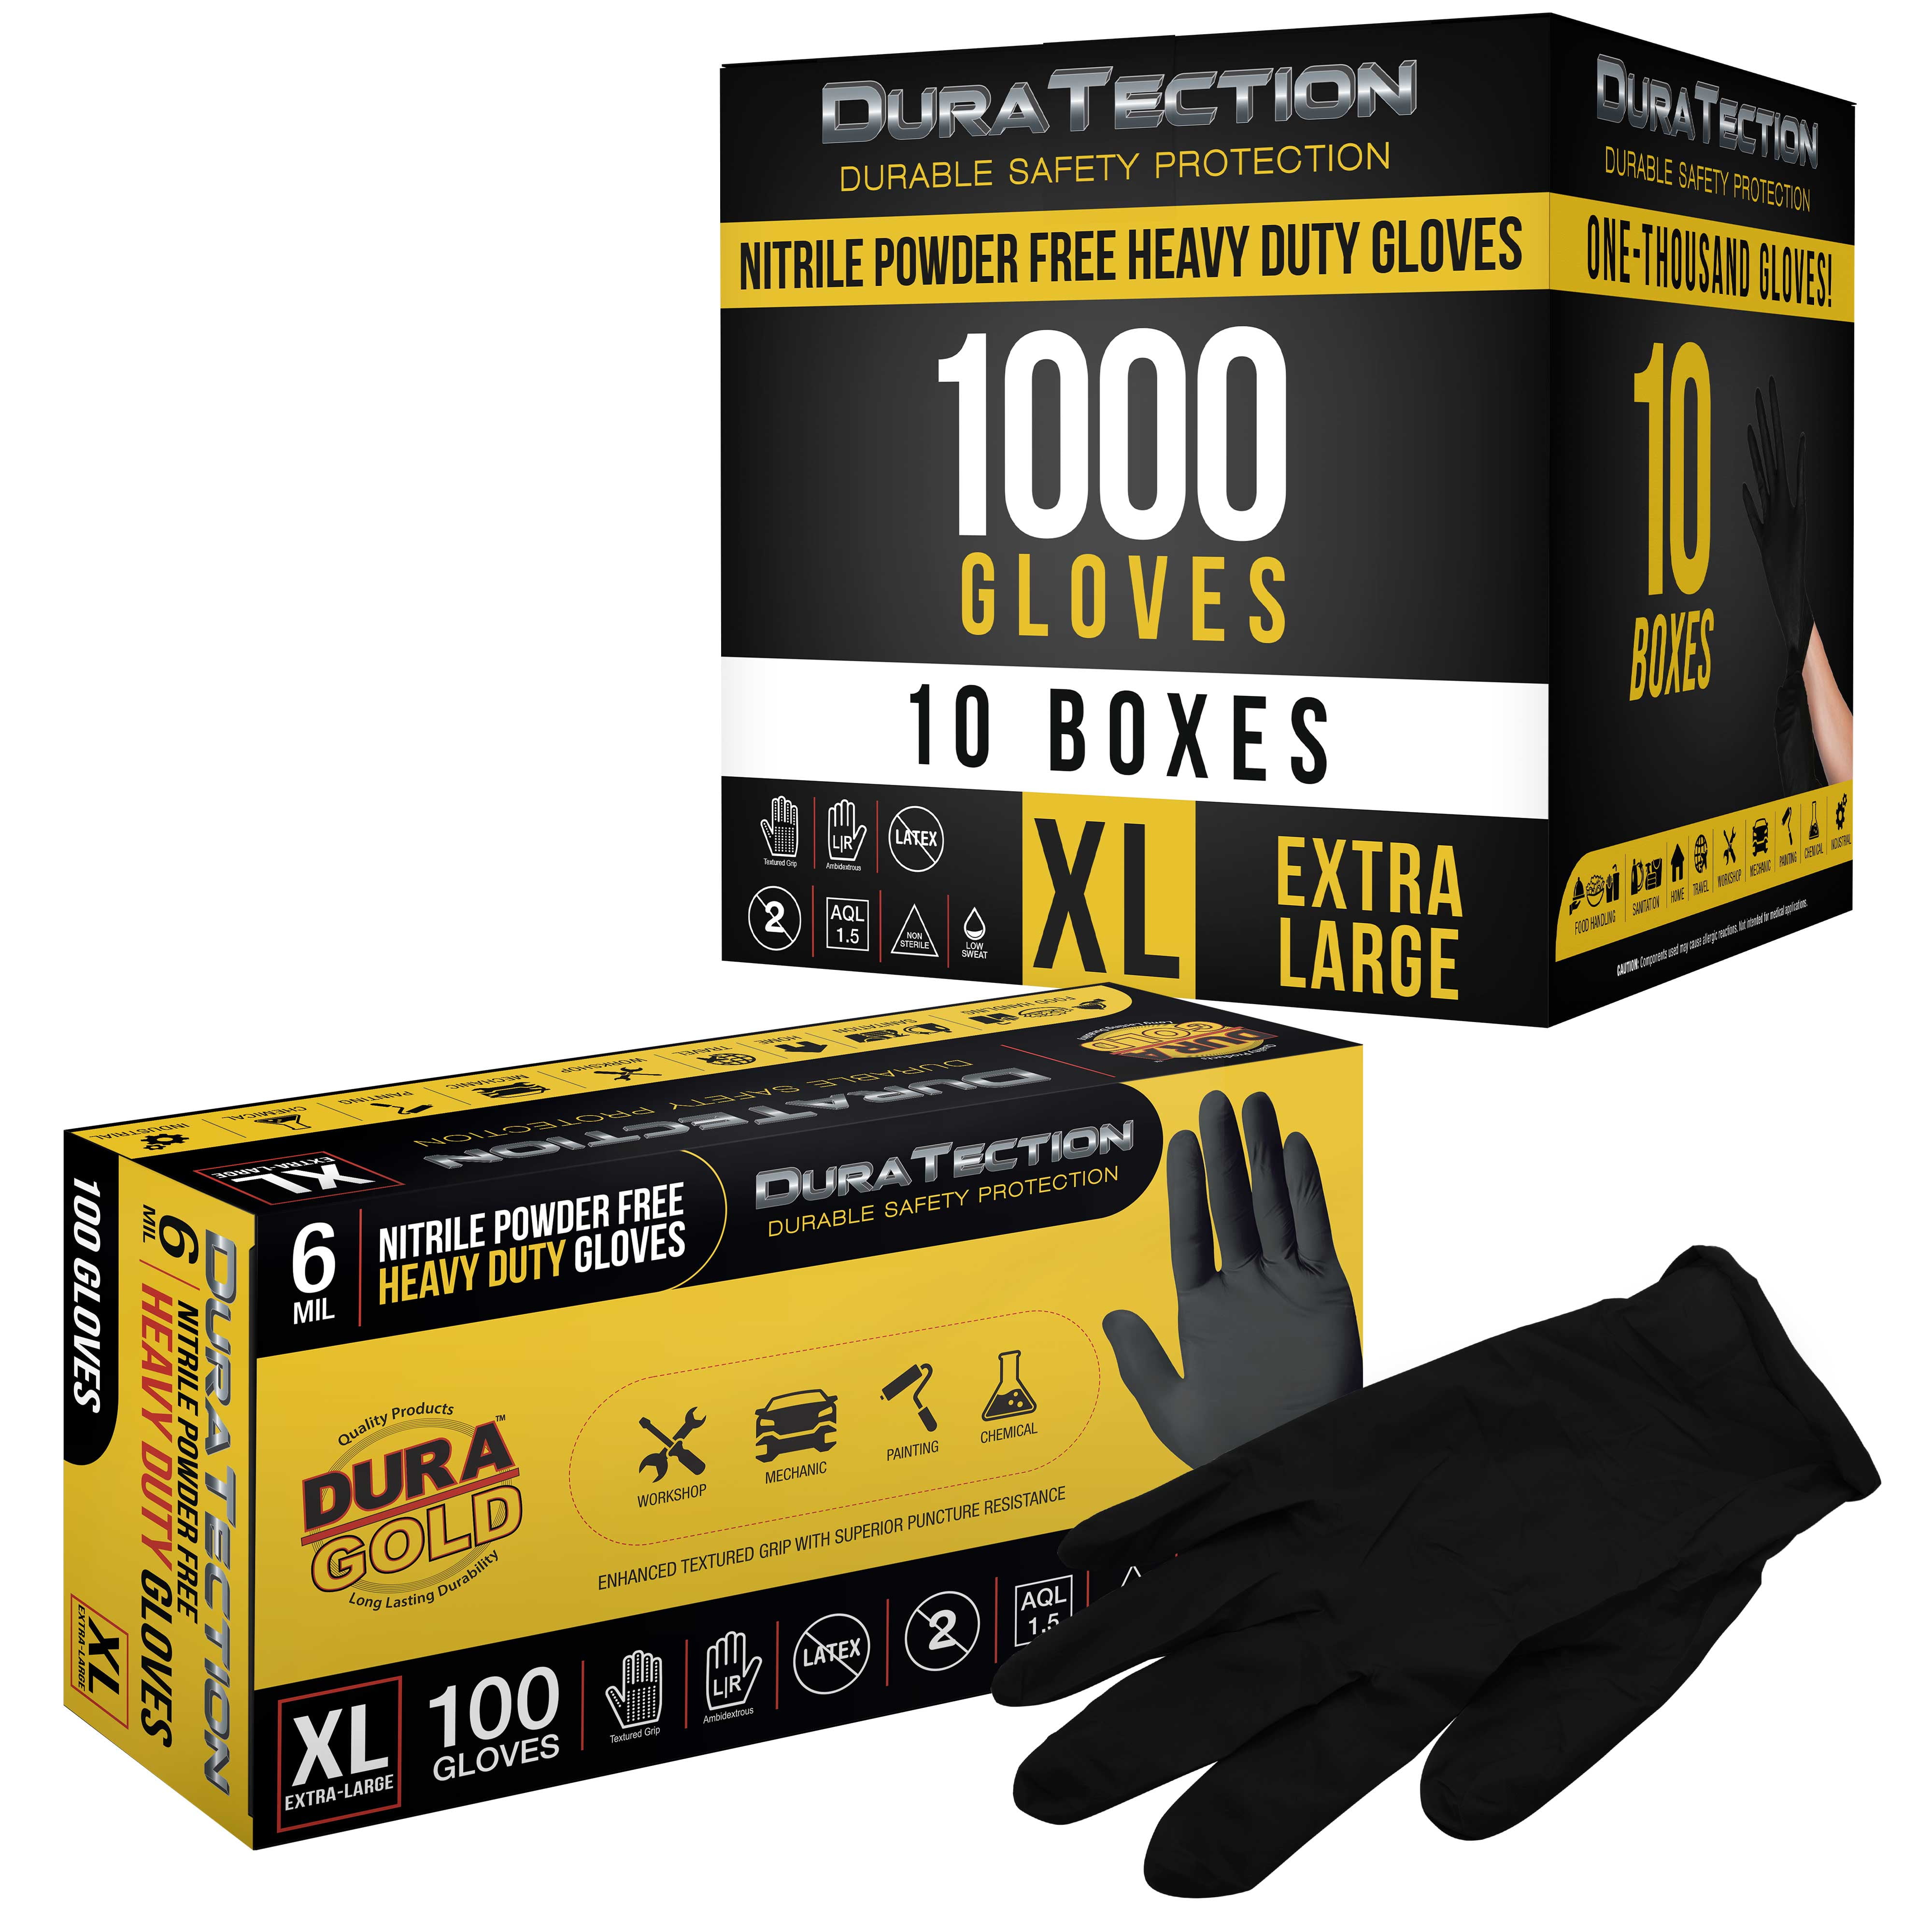 Dura-Gold HD Black Nitrile Disposable Gloves, Box of 100, Size X-Large, 6  Mil - Latex Free, Powder Free, Textured Grip 1 X-Large (Pcak of 100)